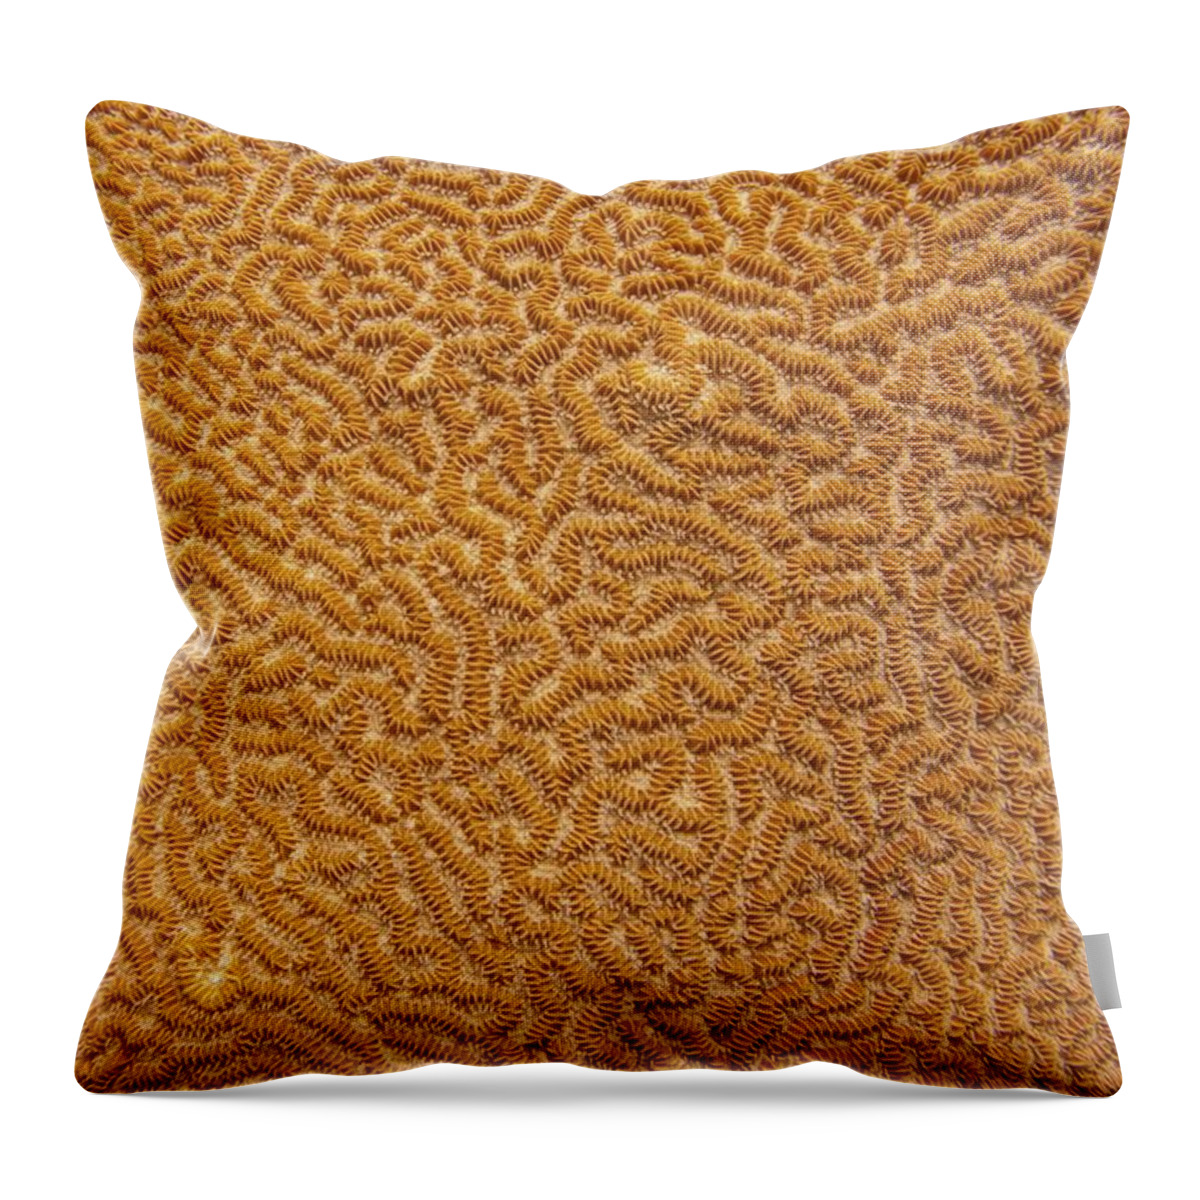 Texture Throw Pillow featuring the photograph Brain Coral 47 by Michael Fryd